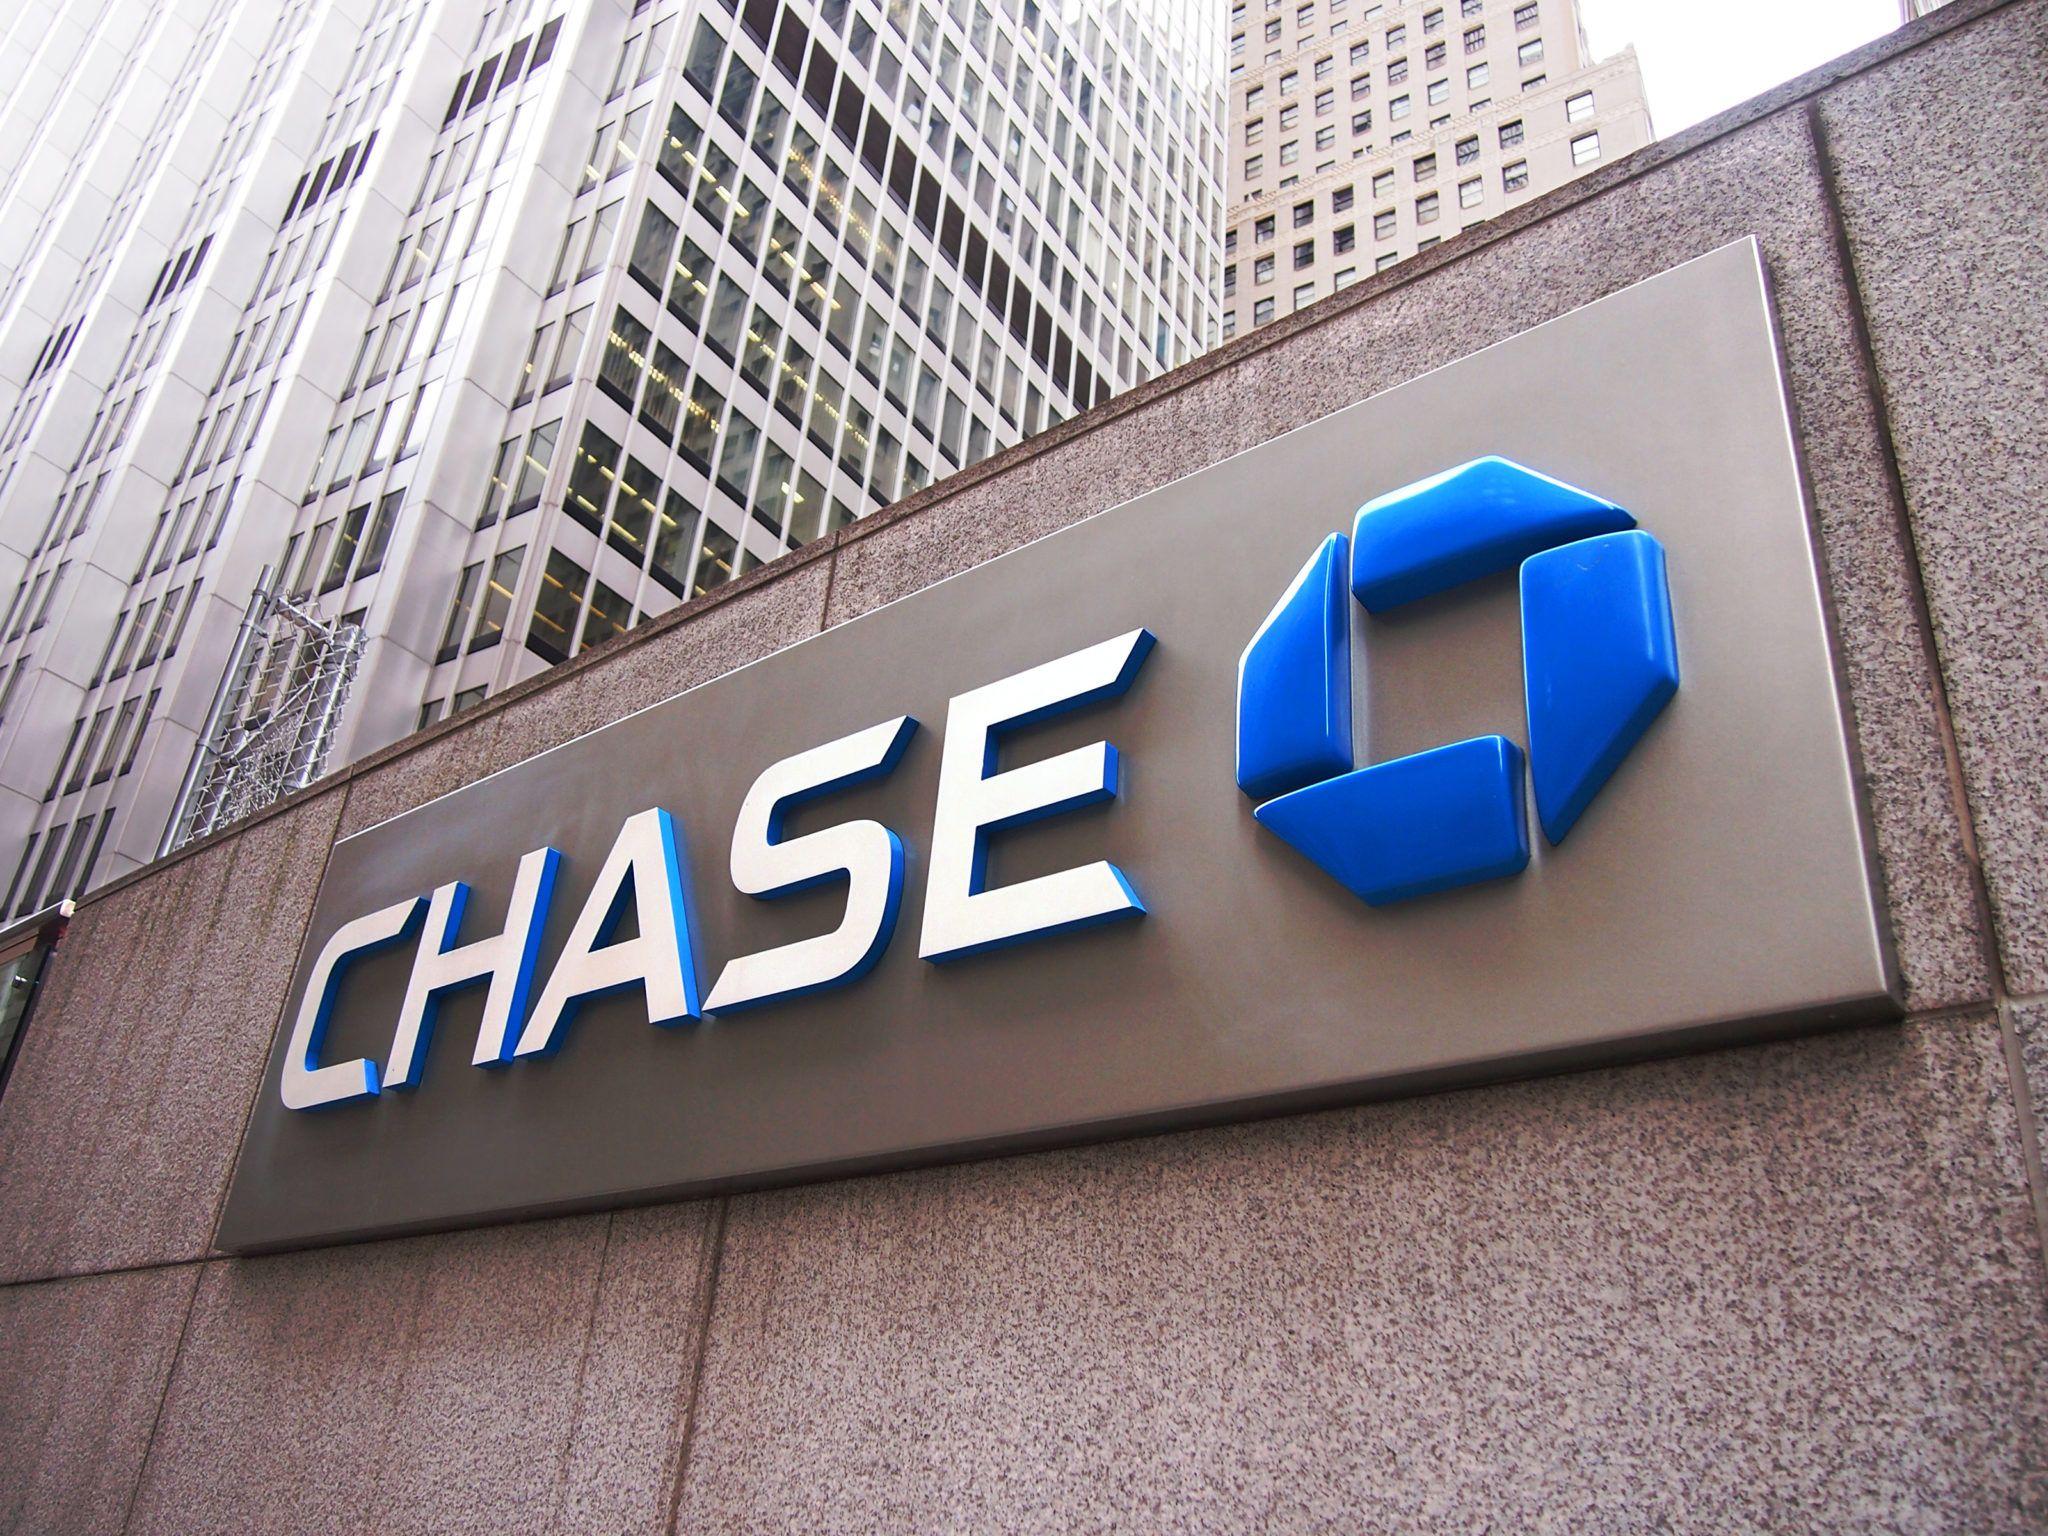 Current Chase Logo - 6 Best Chase Business Credit Cards - Earn $1,000+ Rewards [2019]